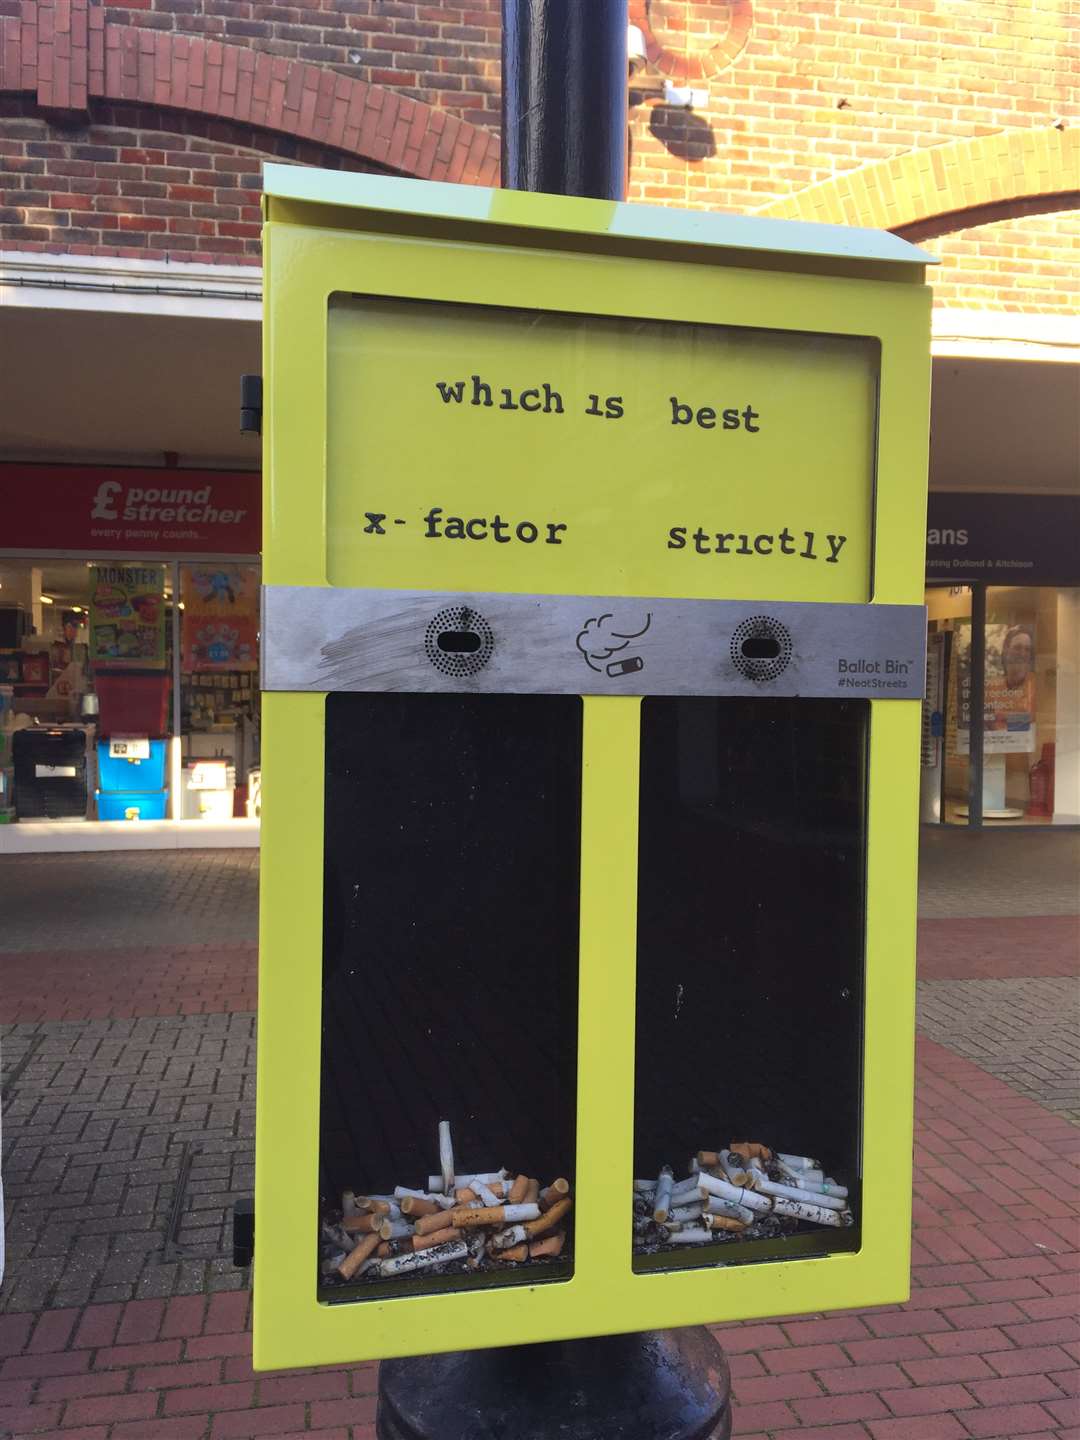 Smokers can stub out their cigarettes and drop the butts in either section to answer the question.